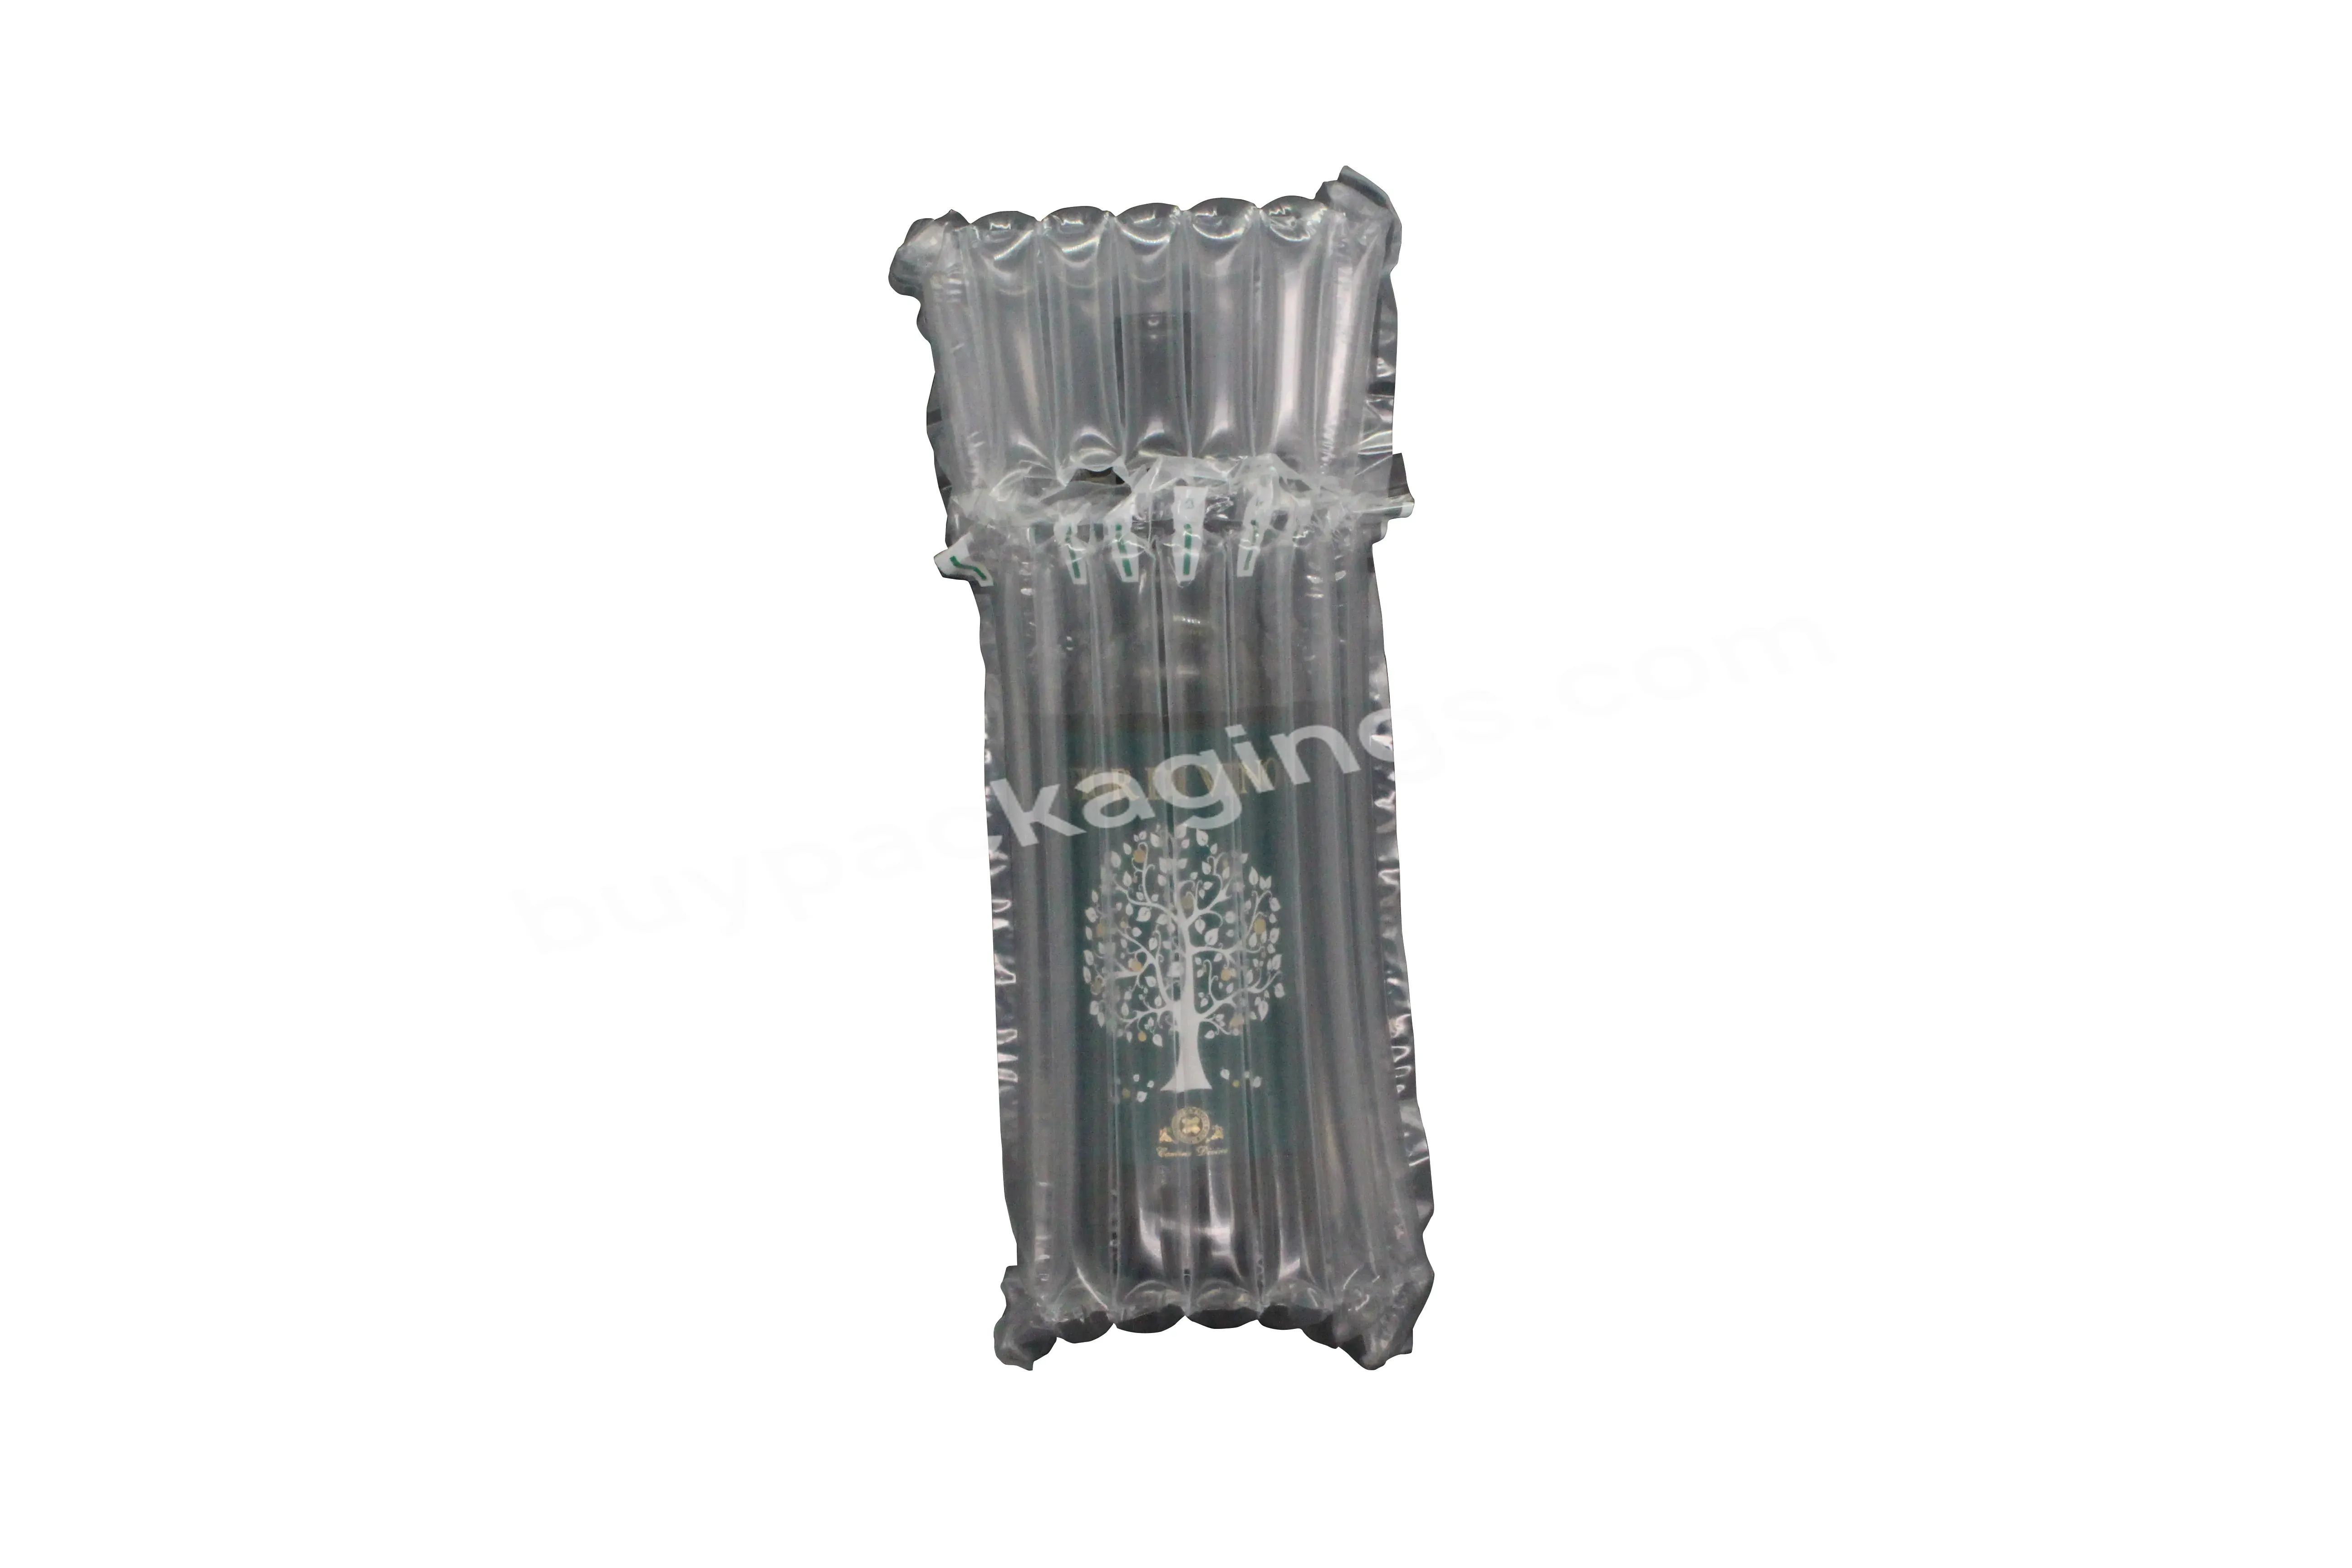 Wholesale For Milk Powder And Wine Bottle Portable Inflatable Packaging Bags Cushioning Wrap Air Column Bag - Buy Packaging Bag For Milk,Cushioning Wrap Air Column Bag,Air Column Bag Custom Size.